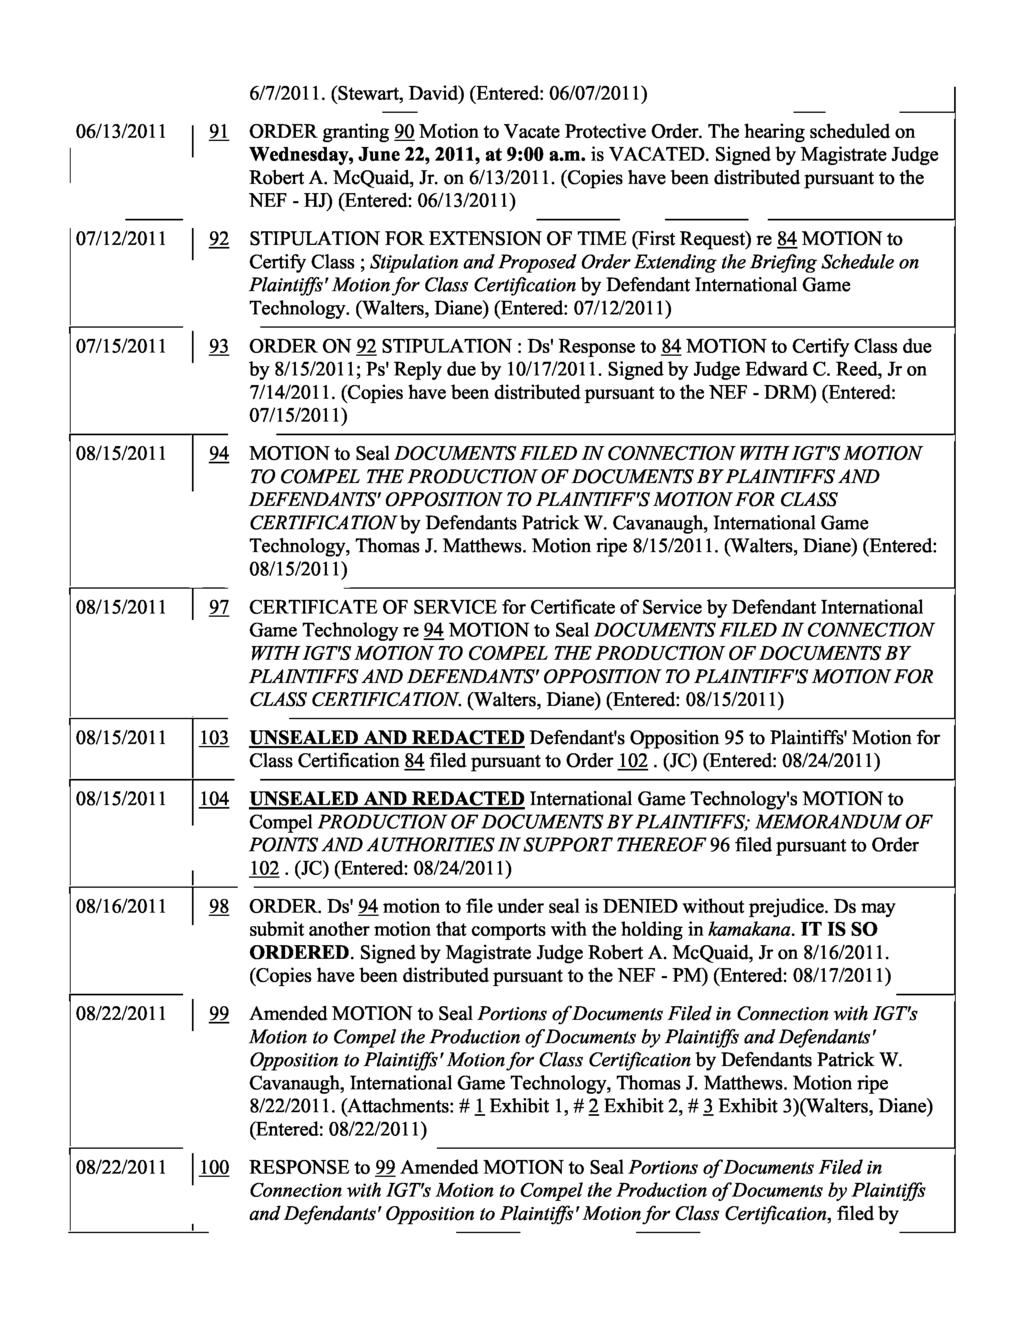 6/7/2011. (Stewart, David) (Entered: 06/07/2011) 06/13/2011 91 ORDER granting 90 Motion to Vacate Protective Order. The hearing scheduled on Wednesday, June 22, 2011, at 9:00 a.m. is VACATED.